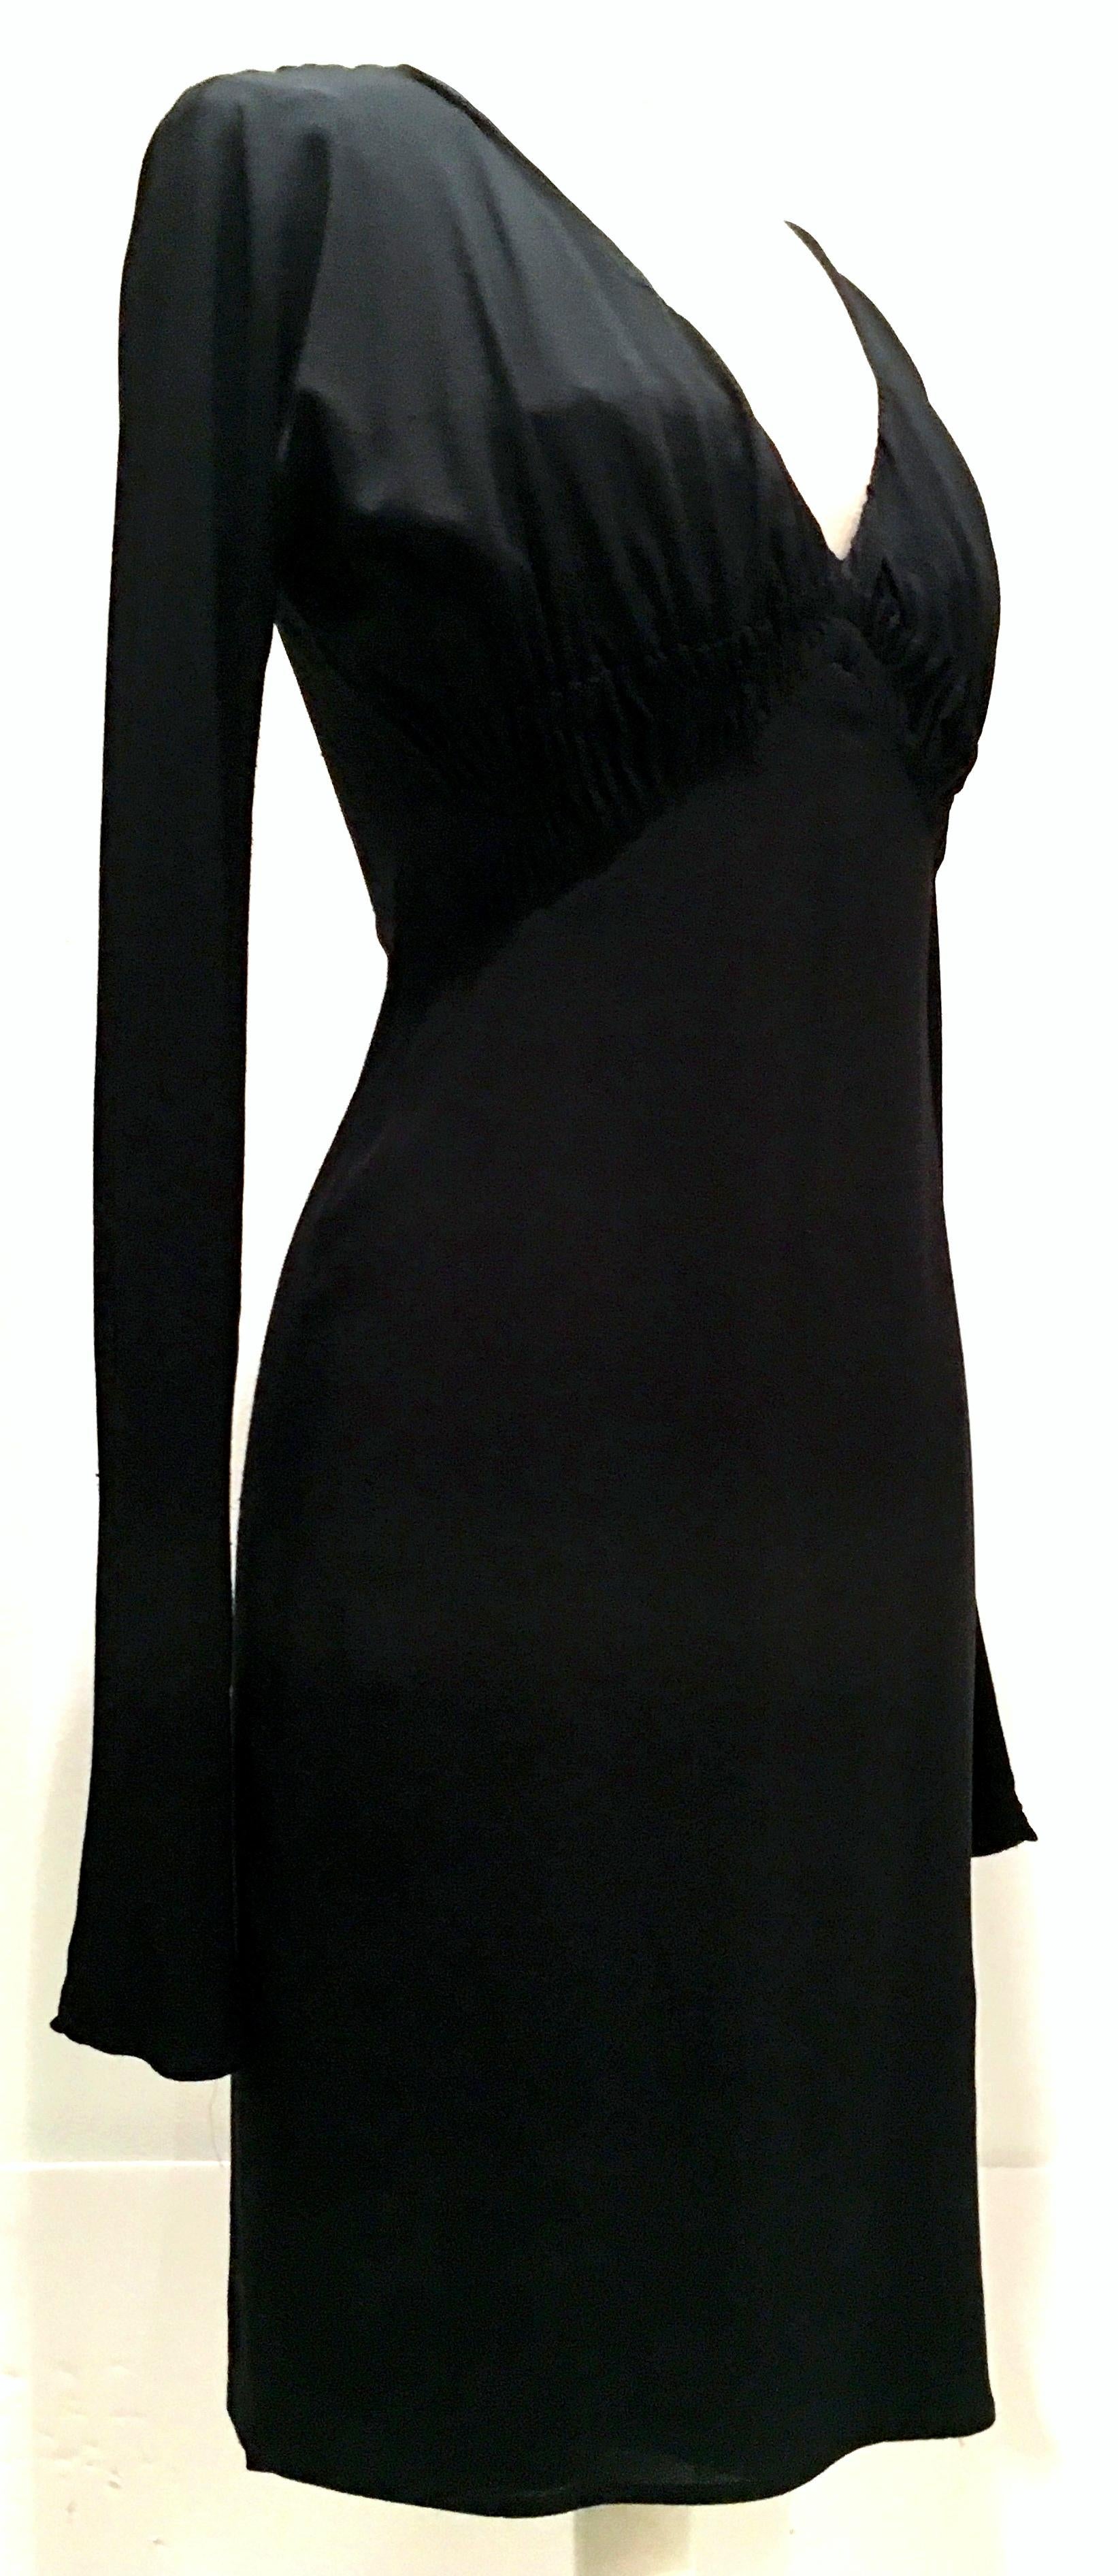 2003 Italian Silk Long Sleeve Deep Plunge Black Dress By Tom Ford For Gucci-42 In Good Condition For Sale In West Palm Beach, FL